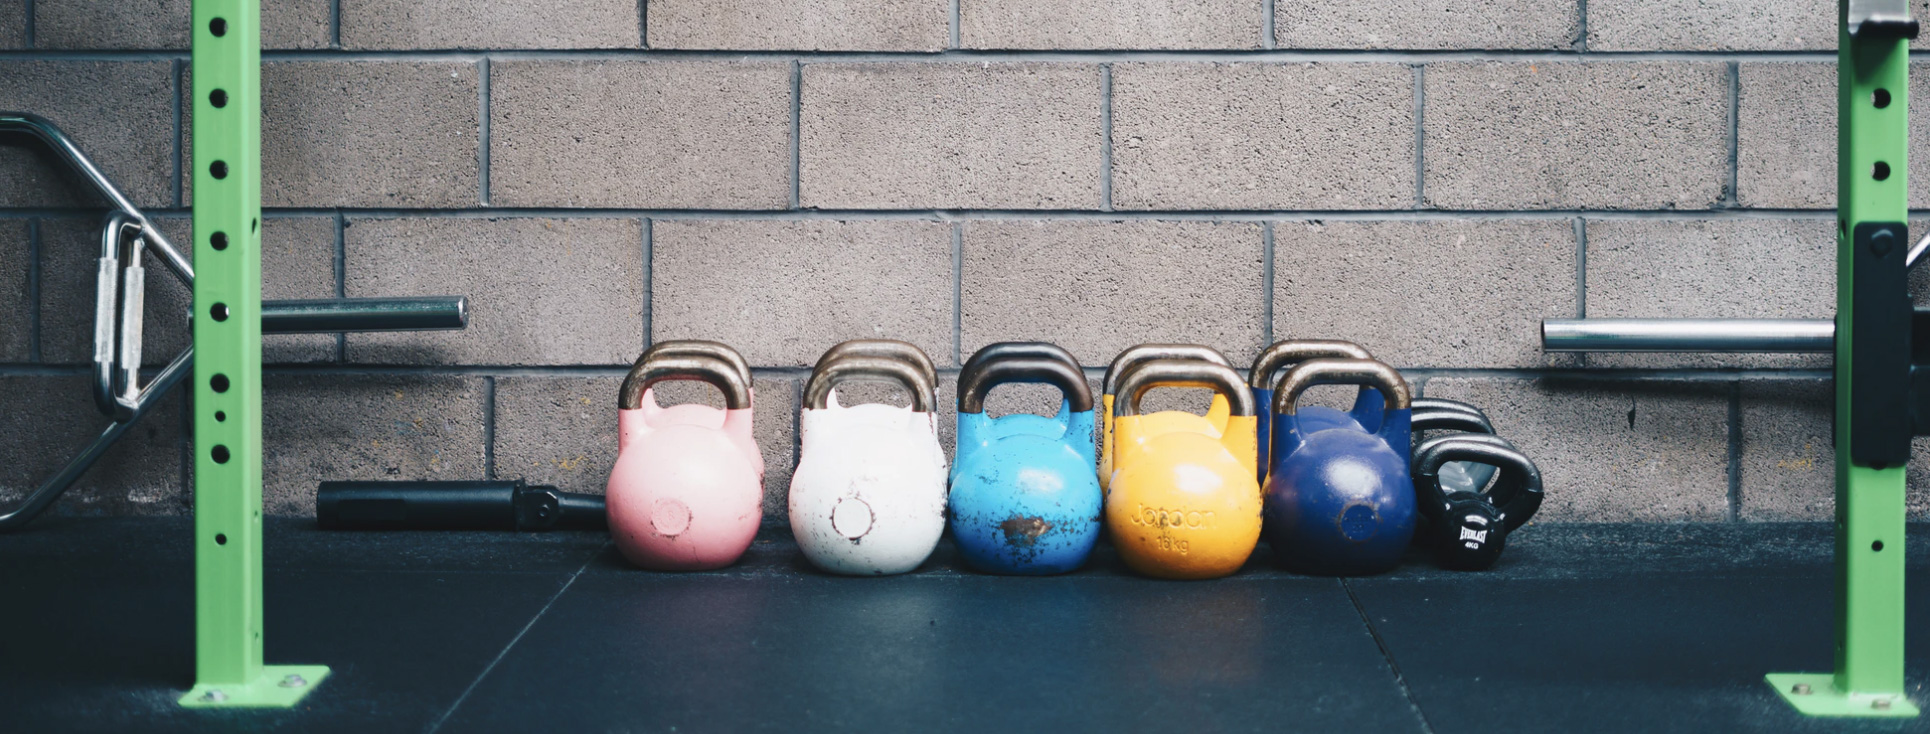 Kettlebells lined up in a gym for workout